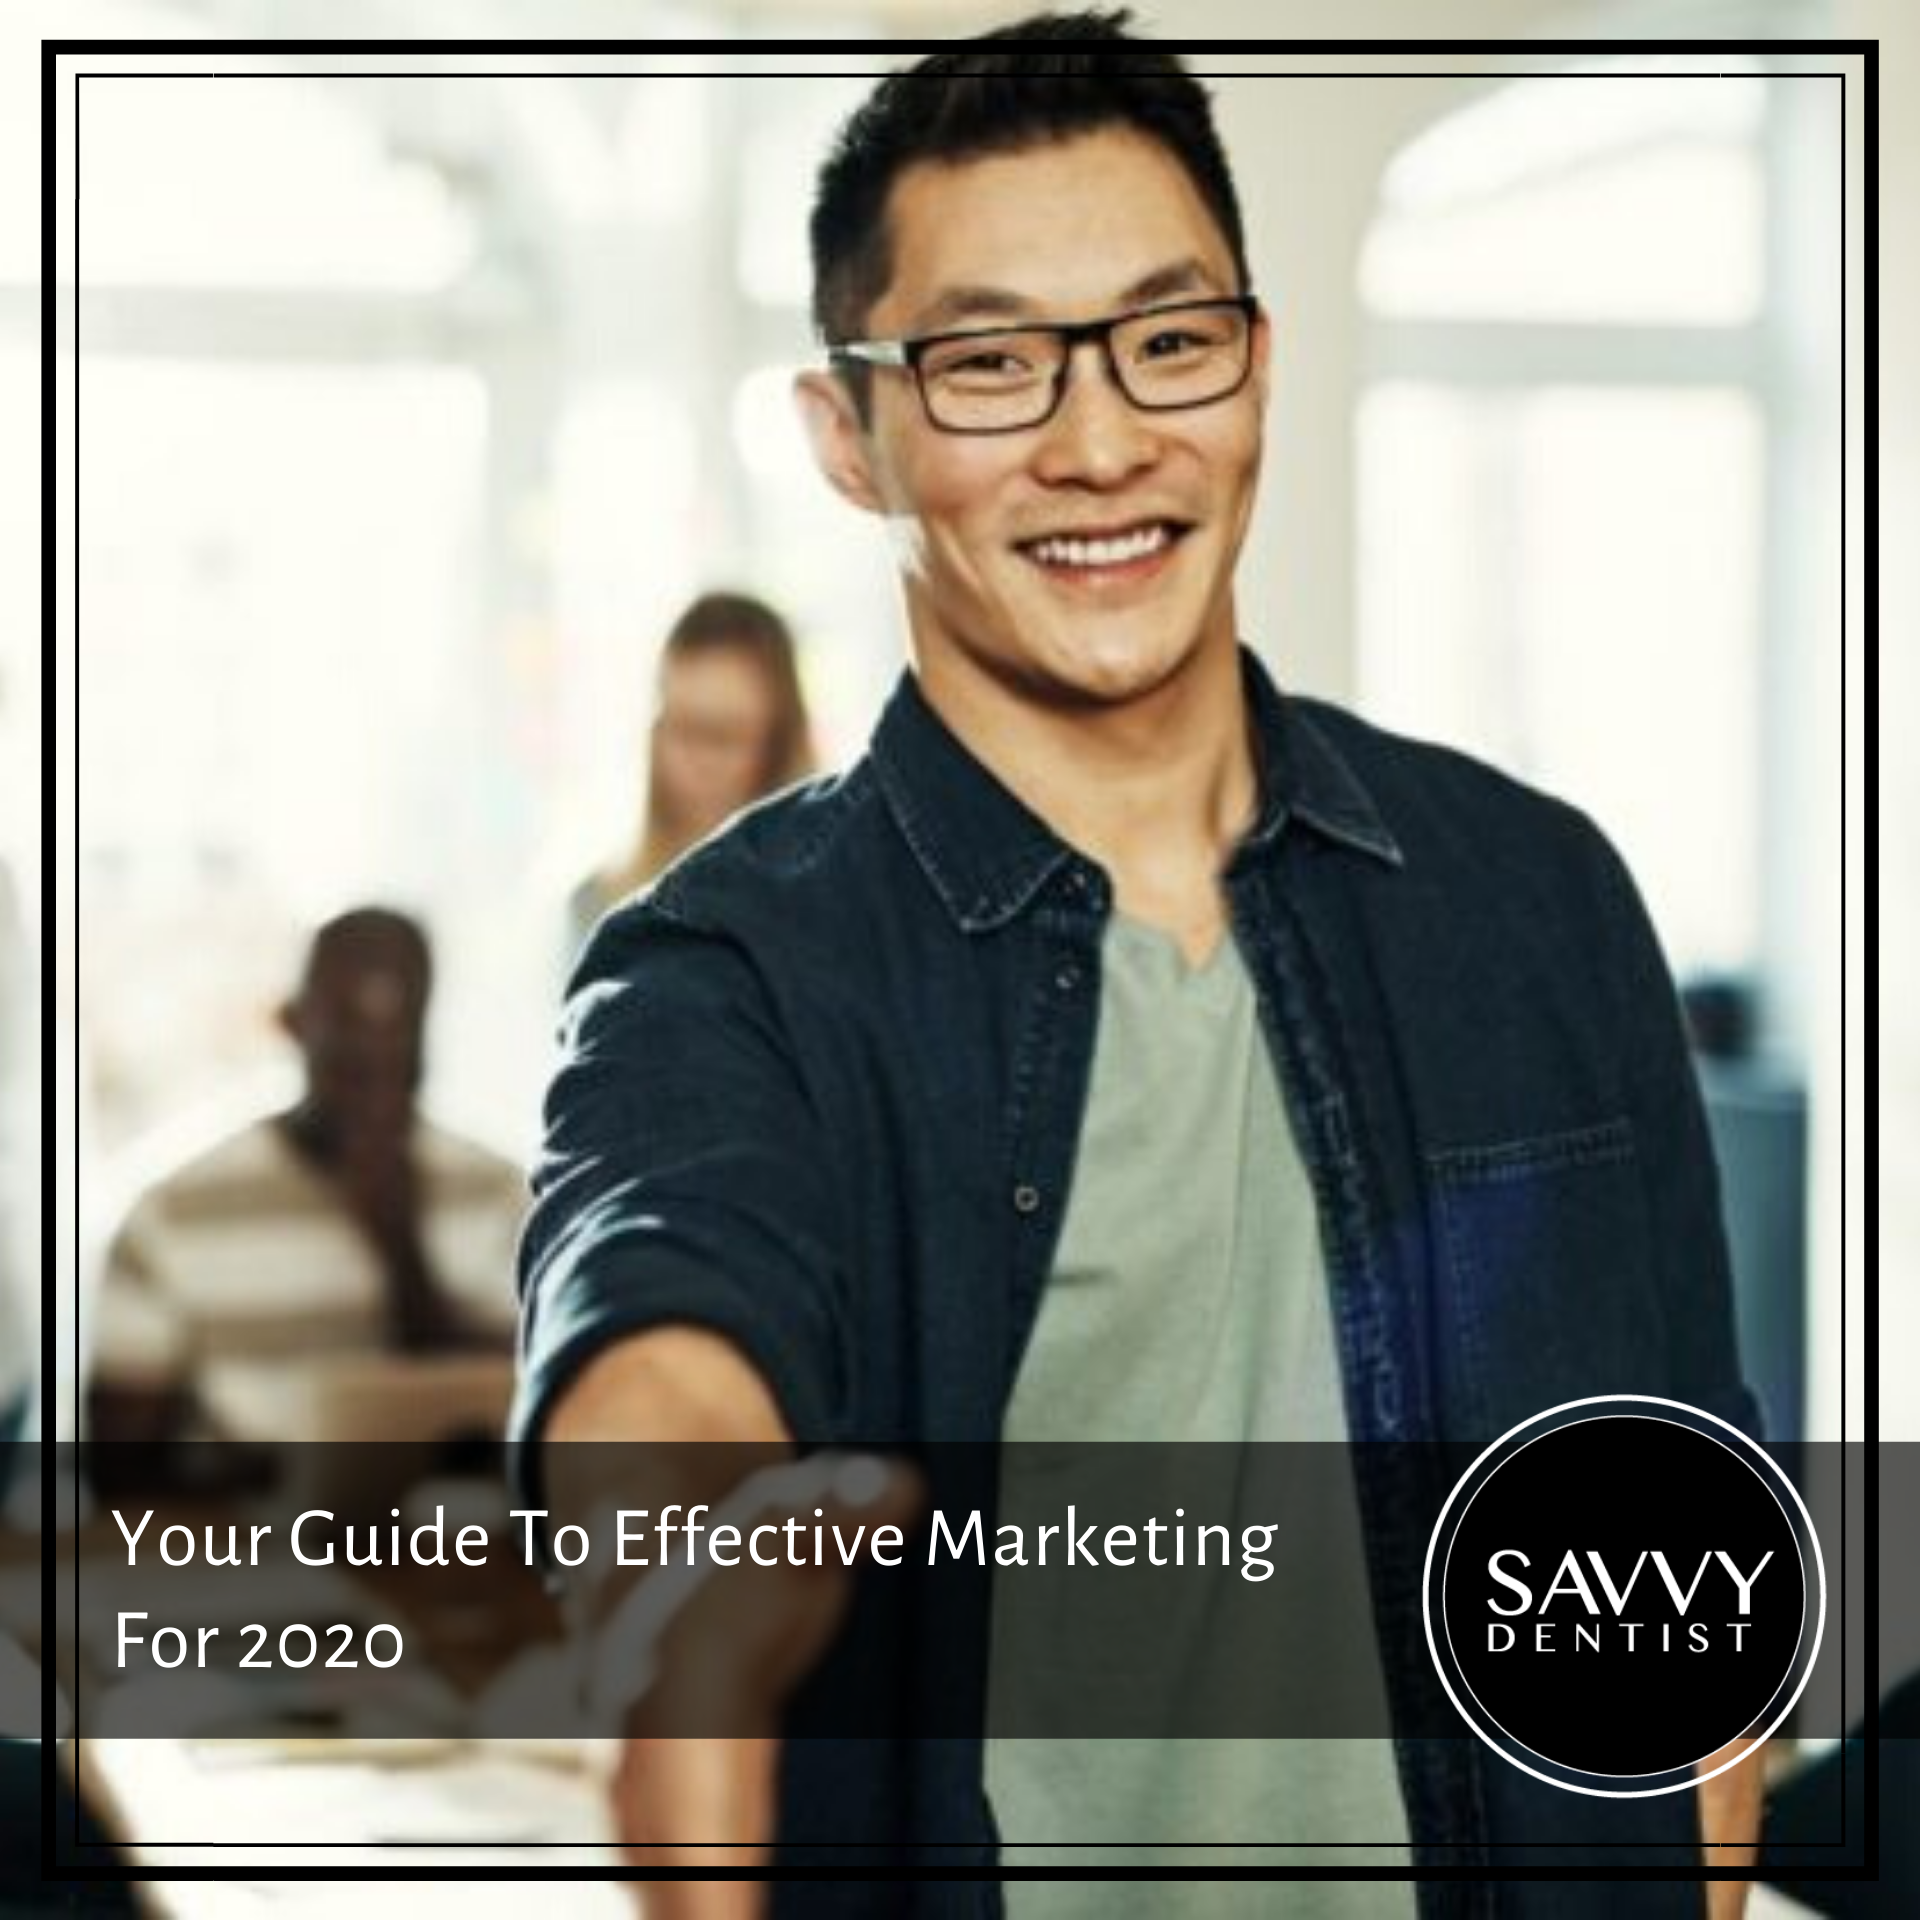 Your Guide To Effective Marketing For 2020